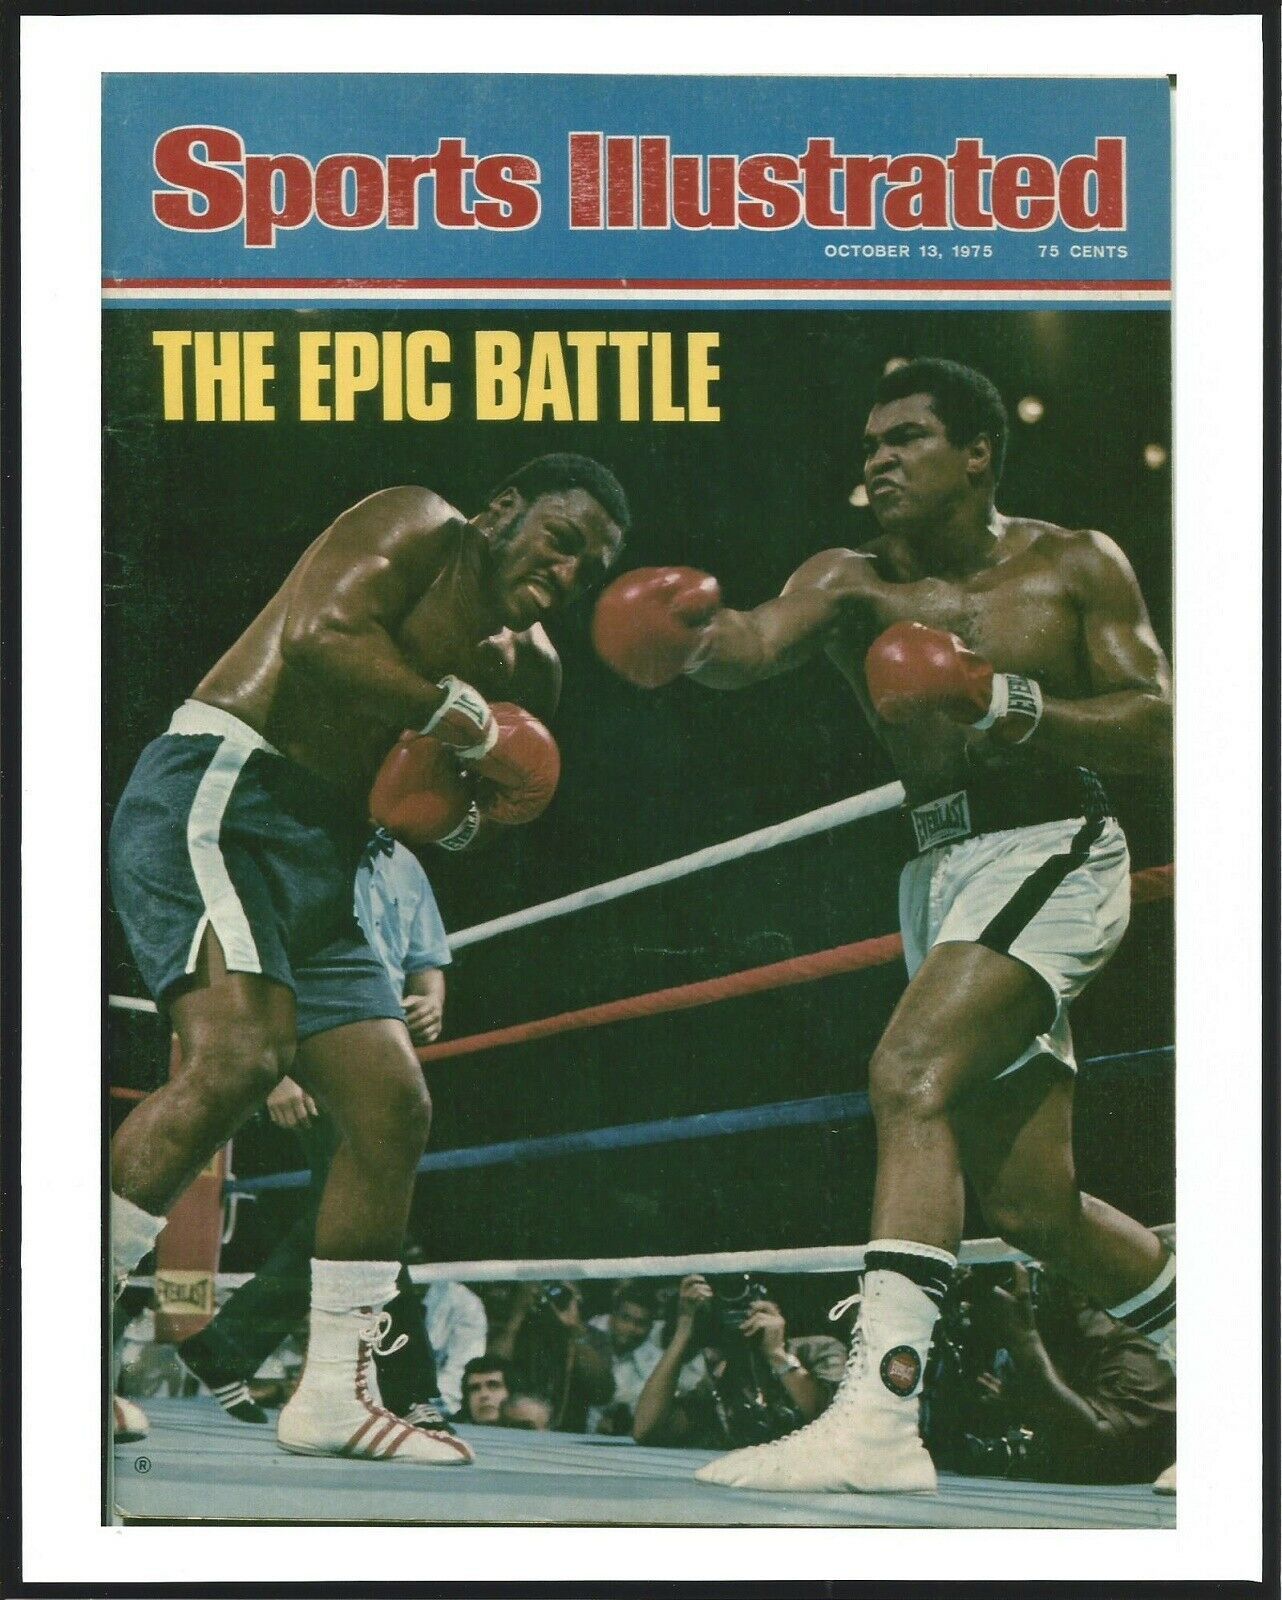 1975 Oct. Issue of Sports Illustrated Mag. With MUHAMMAD ALI - 8" x 10" Photo - $20.00